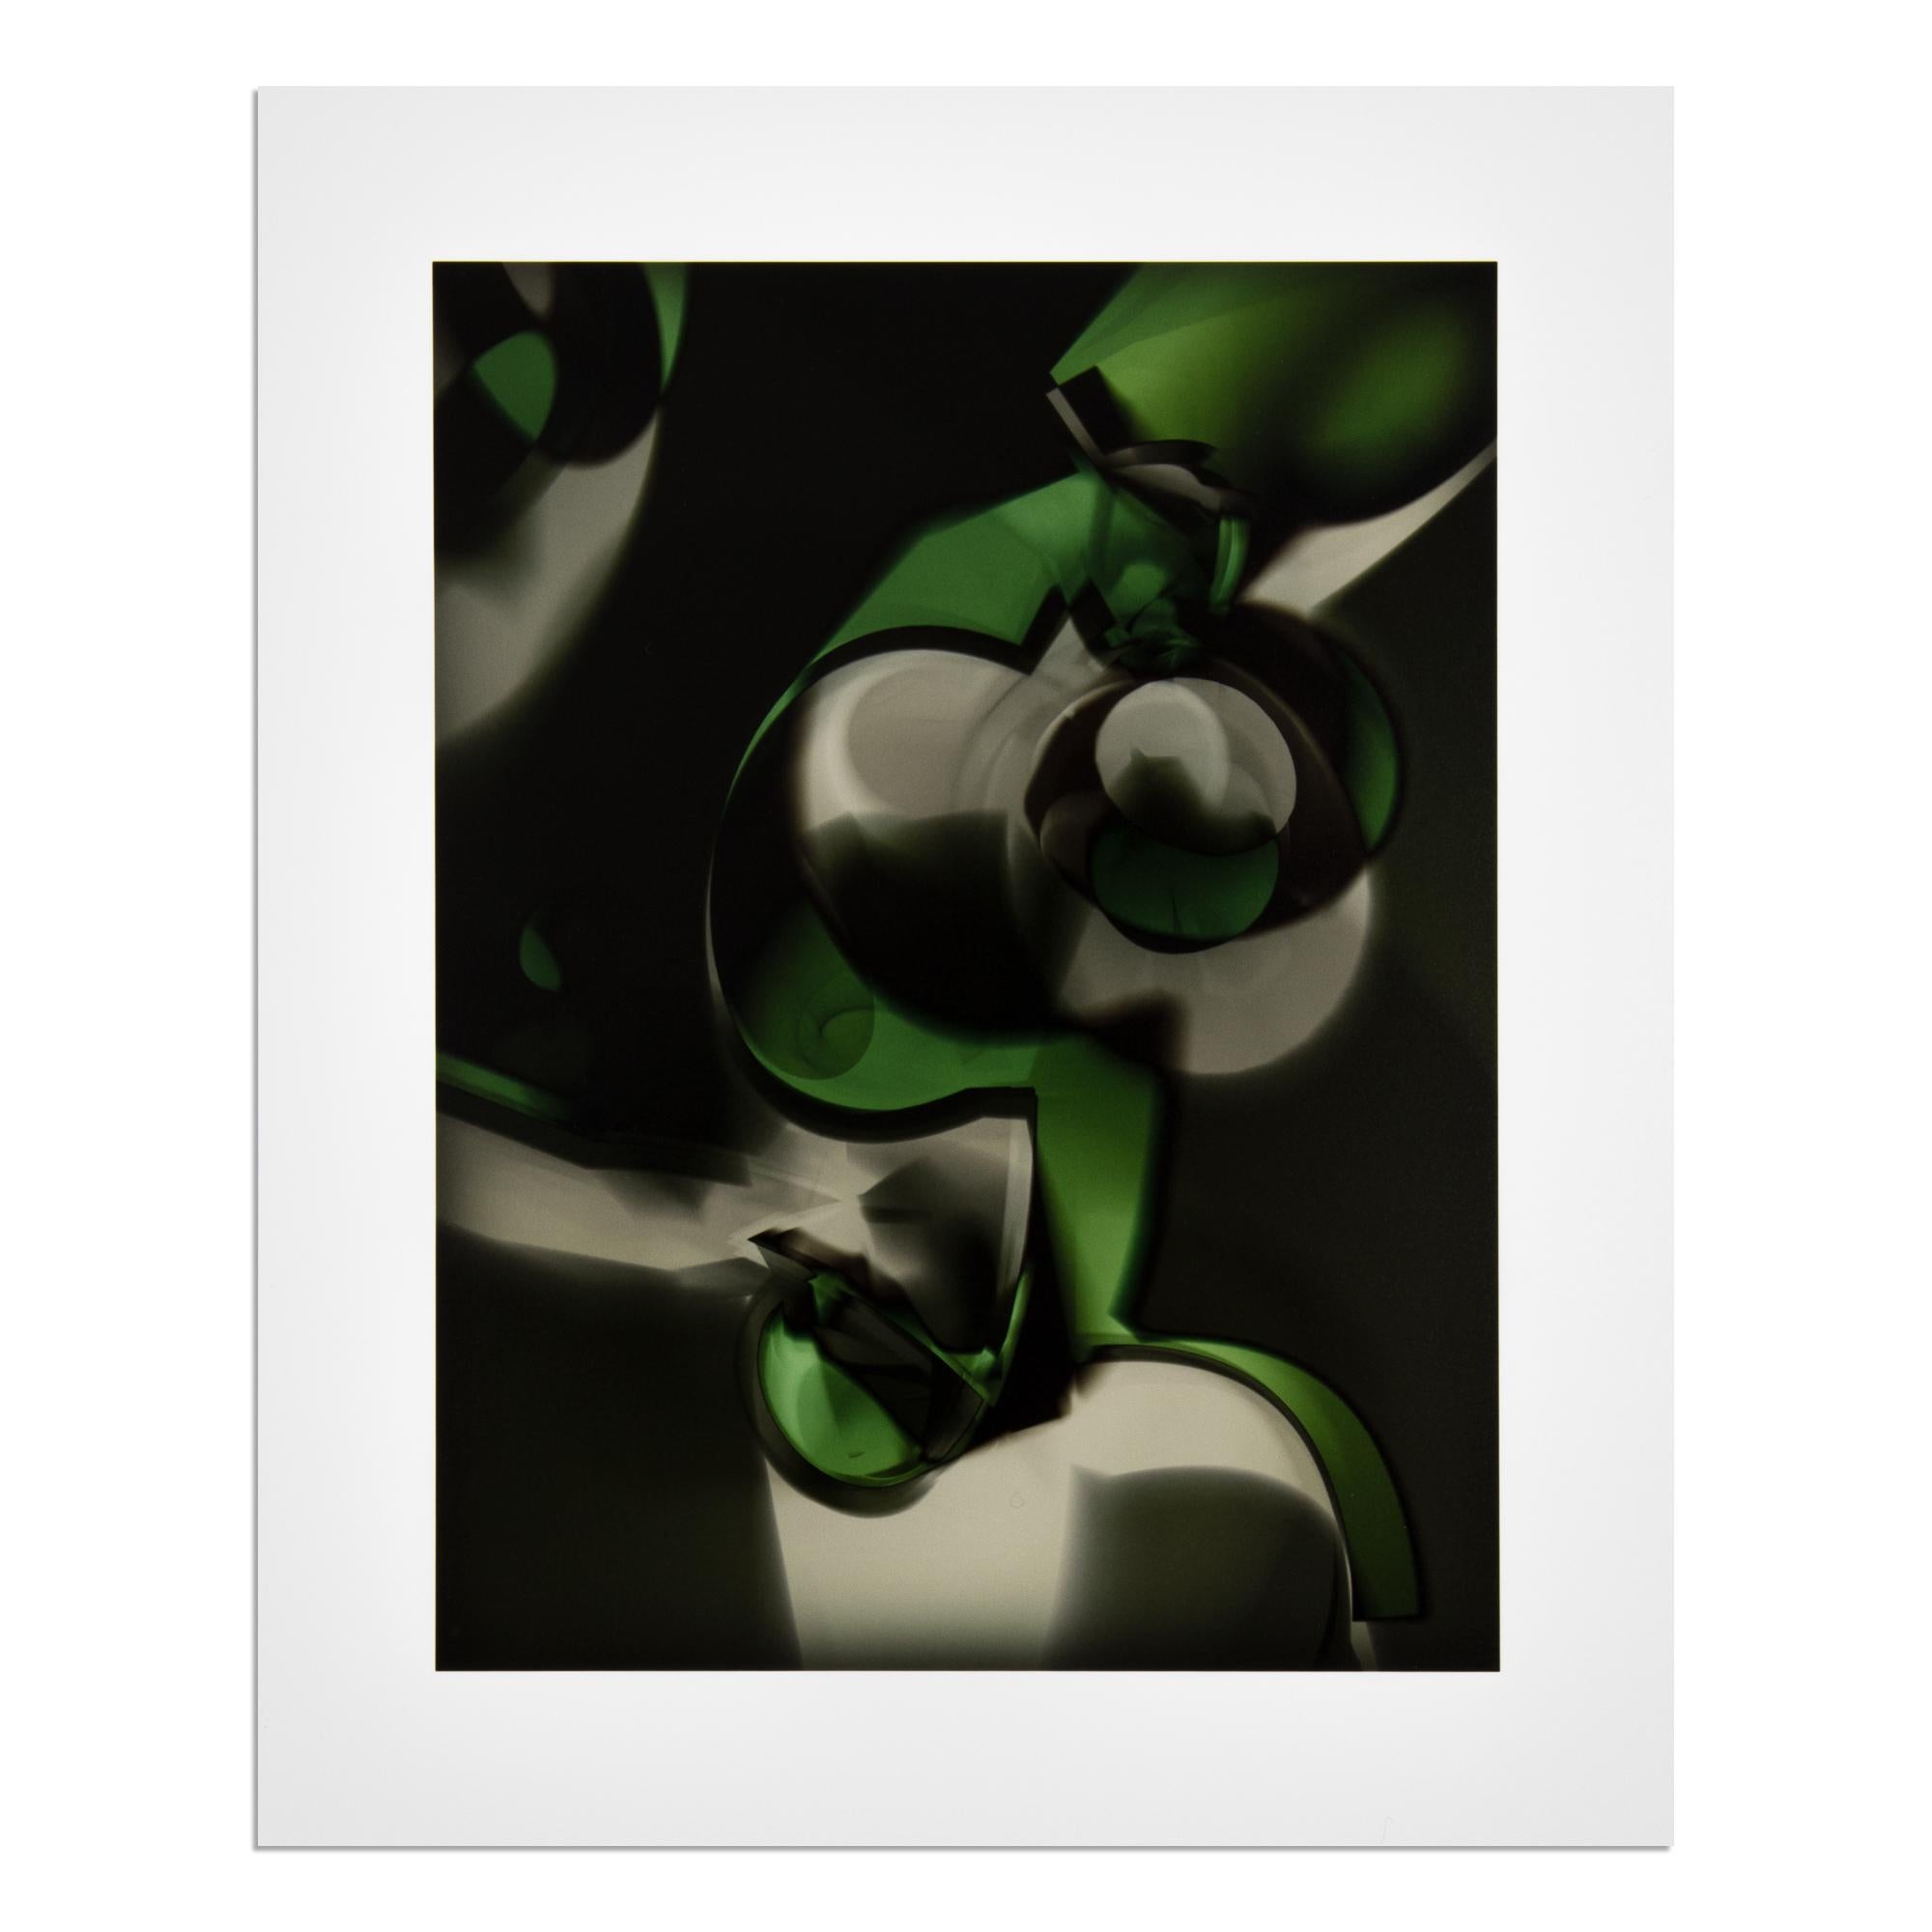 Thomas Ruff (German, b. 1958)
PHG.S.01, 2020
Medium: Chromogenic print
Dimensions: 11 4/5 × 9 2/5 in (30 × 24 cm)
Edition of 100: Hand signed and numbered, verso
Condition: Mint